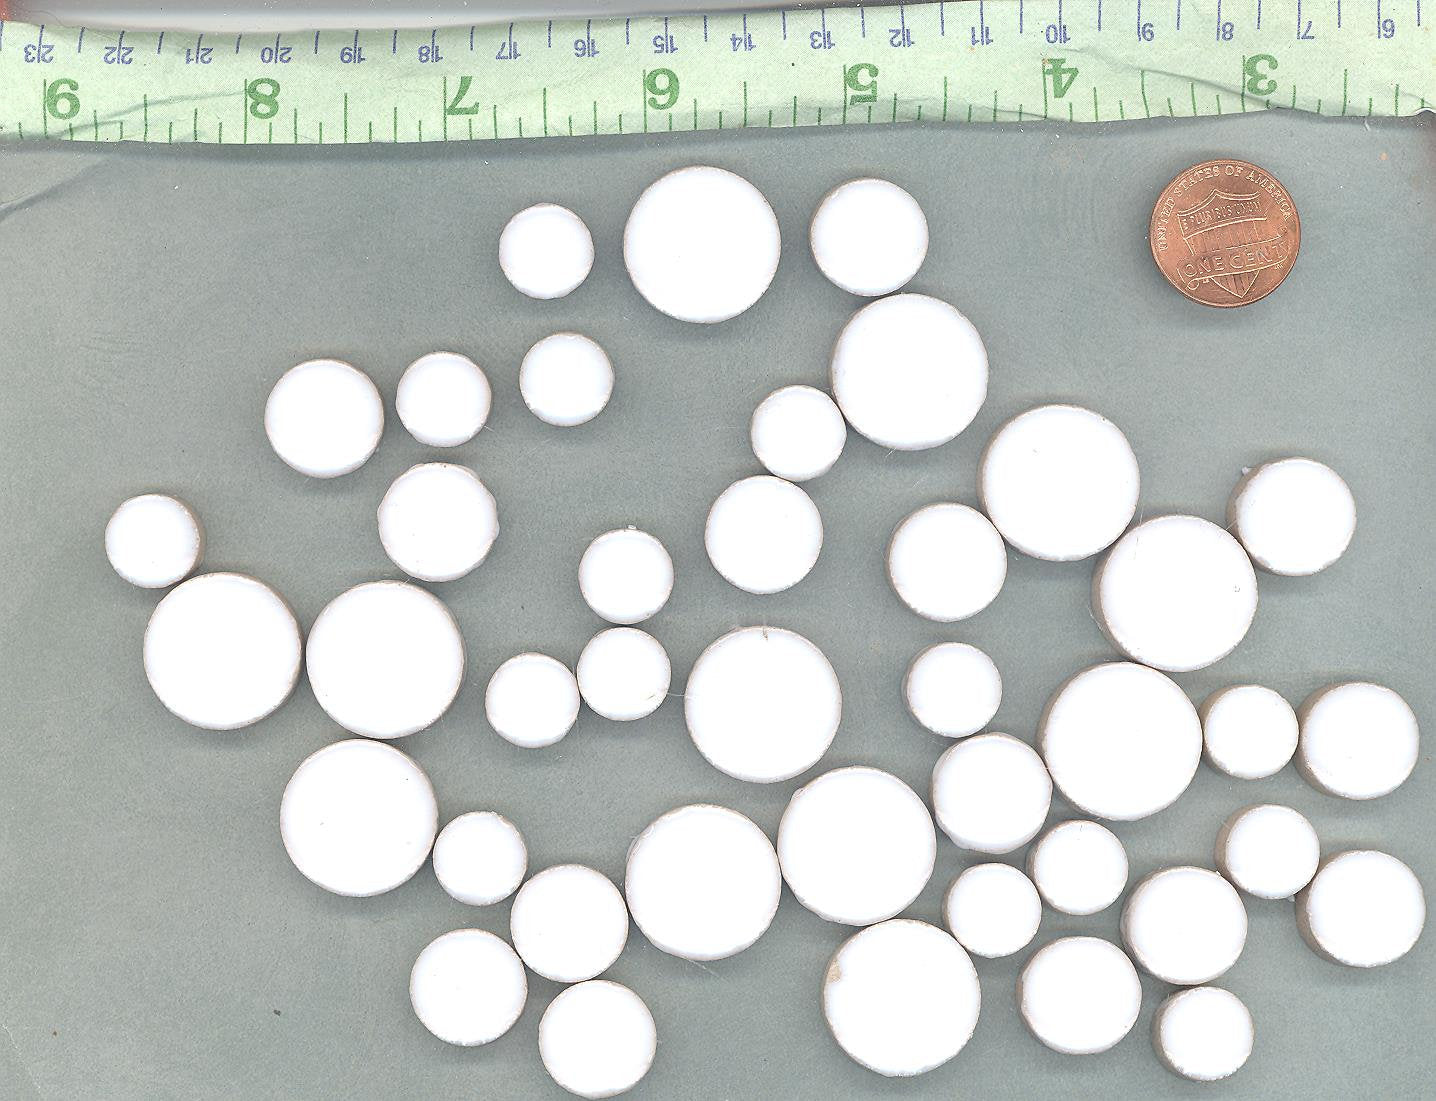 White Circles Mosaic Tiles - 50g Ceramic in Mix of 3 Sizes 1/2" and 3/4" and 5/8"